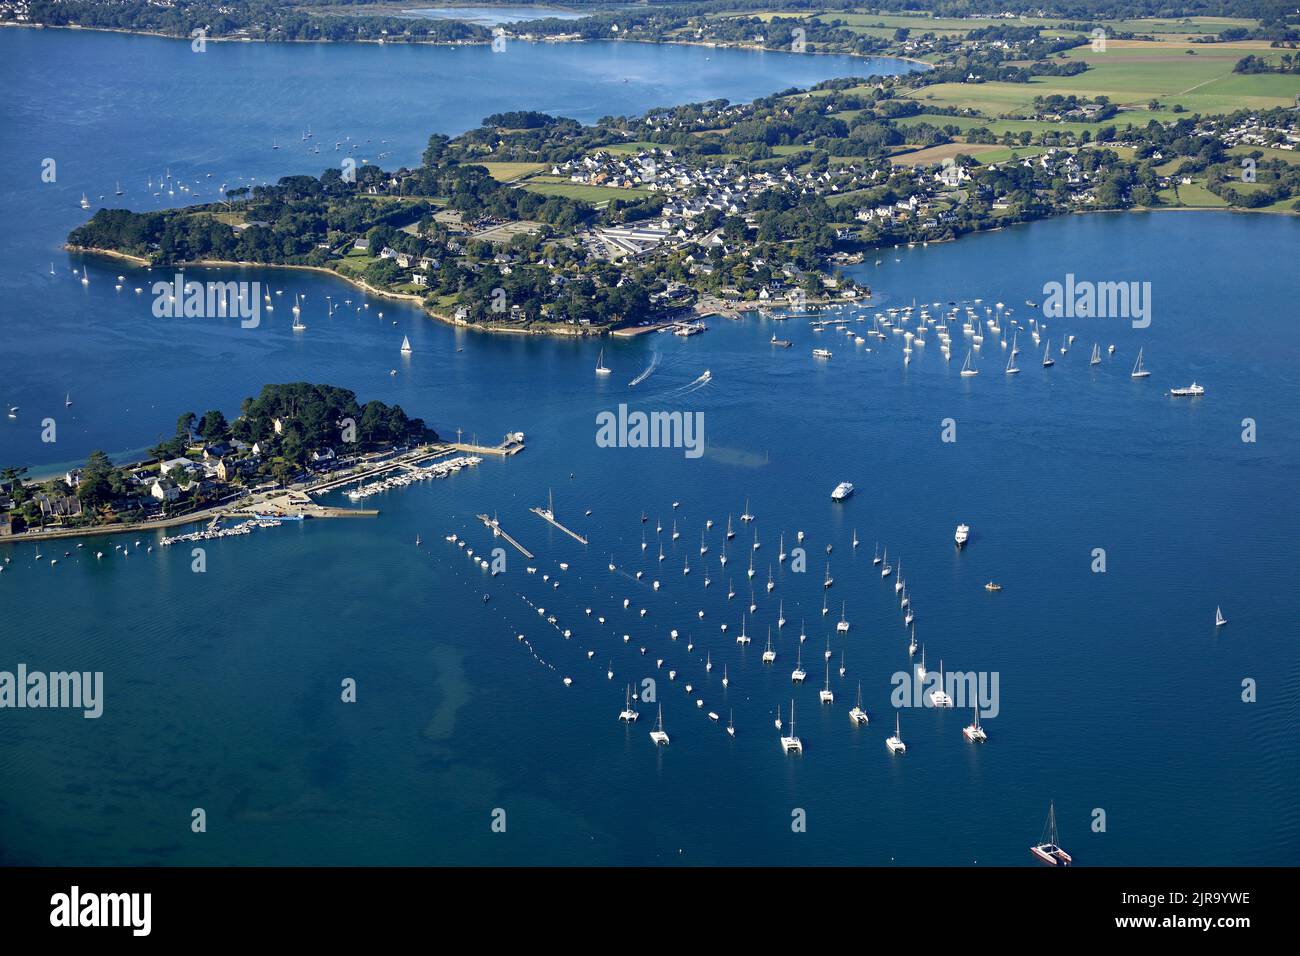 Baden (Brittany, north-western France): aerial view of Port-Blanc (left) and the island “ile aux Moines” (right) in the Gulf of Morbihan Stock Photo